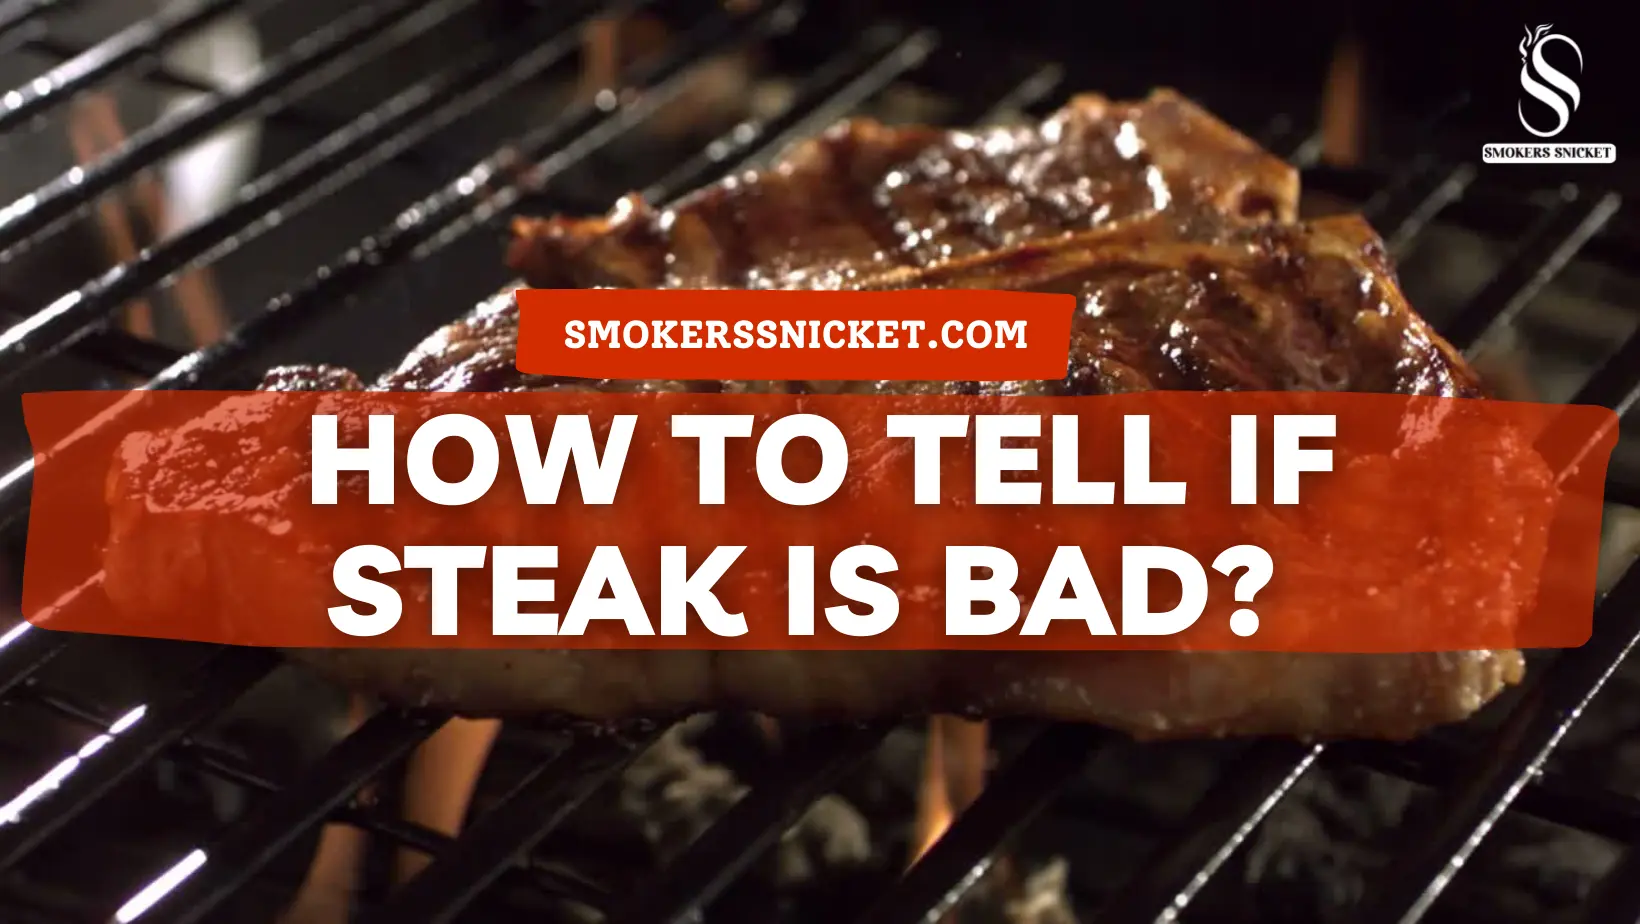 HOW TO TELL IF STEAK IS BAD